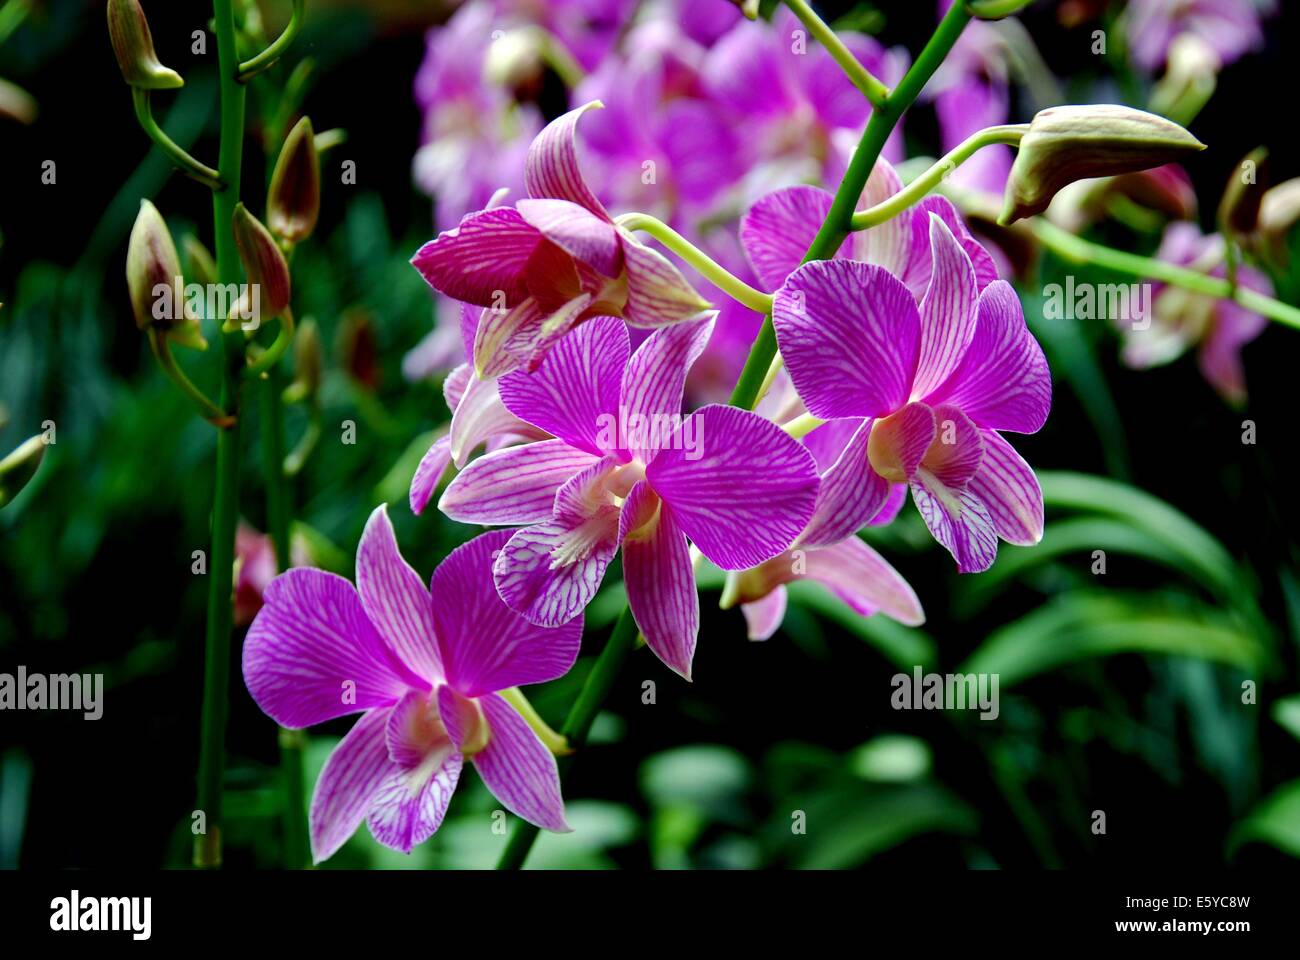 SINGAPORE: Purple orchids at the National Orchid Garden / Singapore Botanic Gardens  * Stock Photo